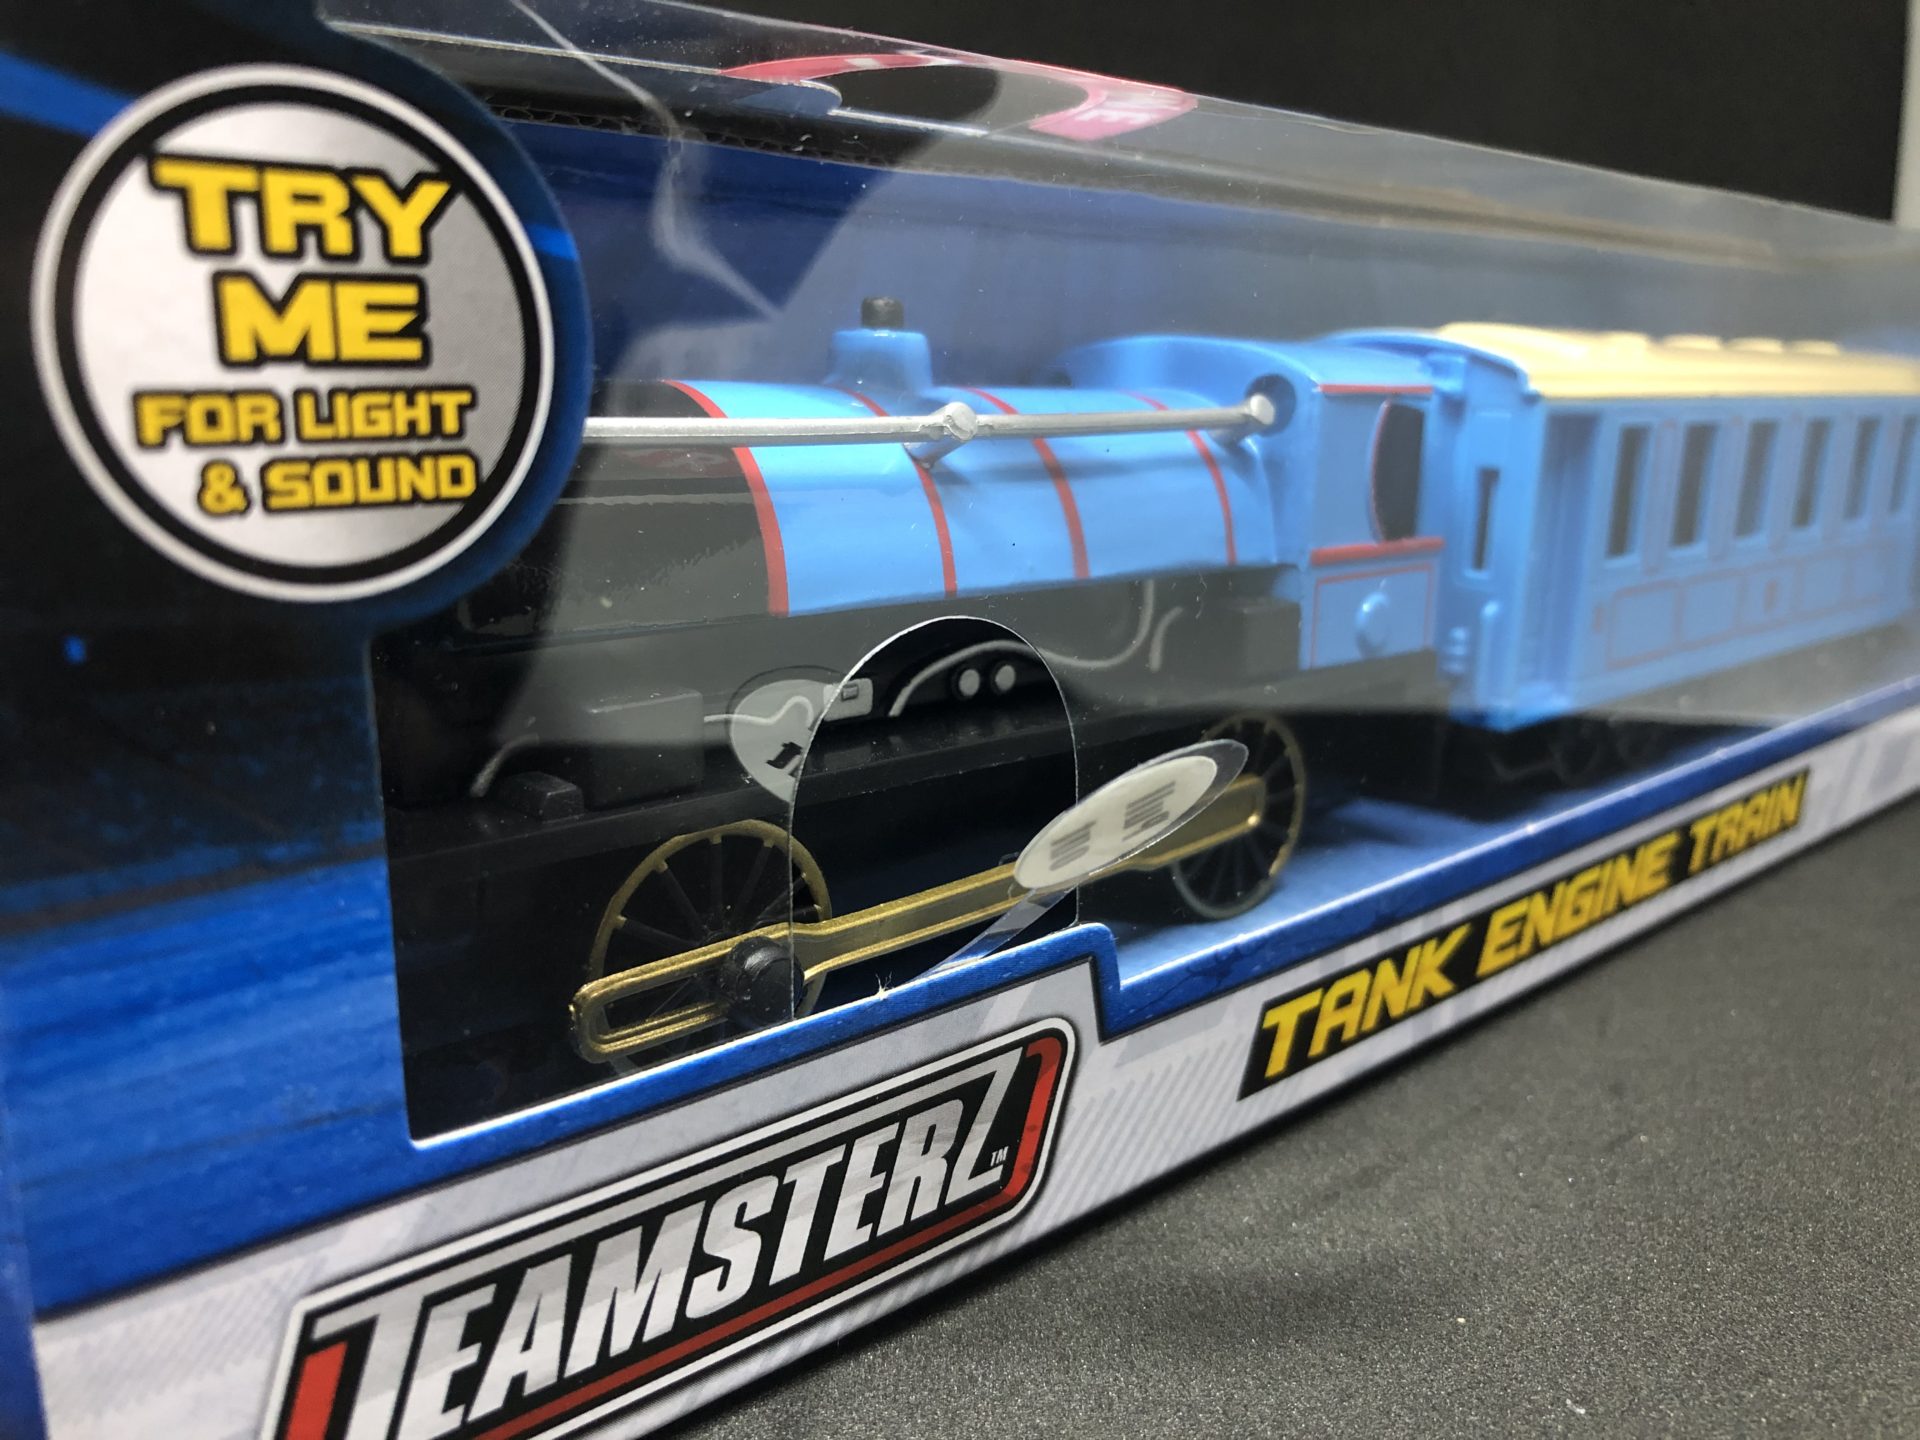 NEW LIGHT AND SOUND TANK ENGINE TRAIN RED TEAMSTERS 